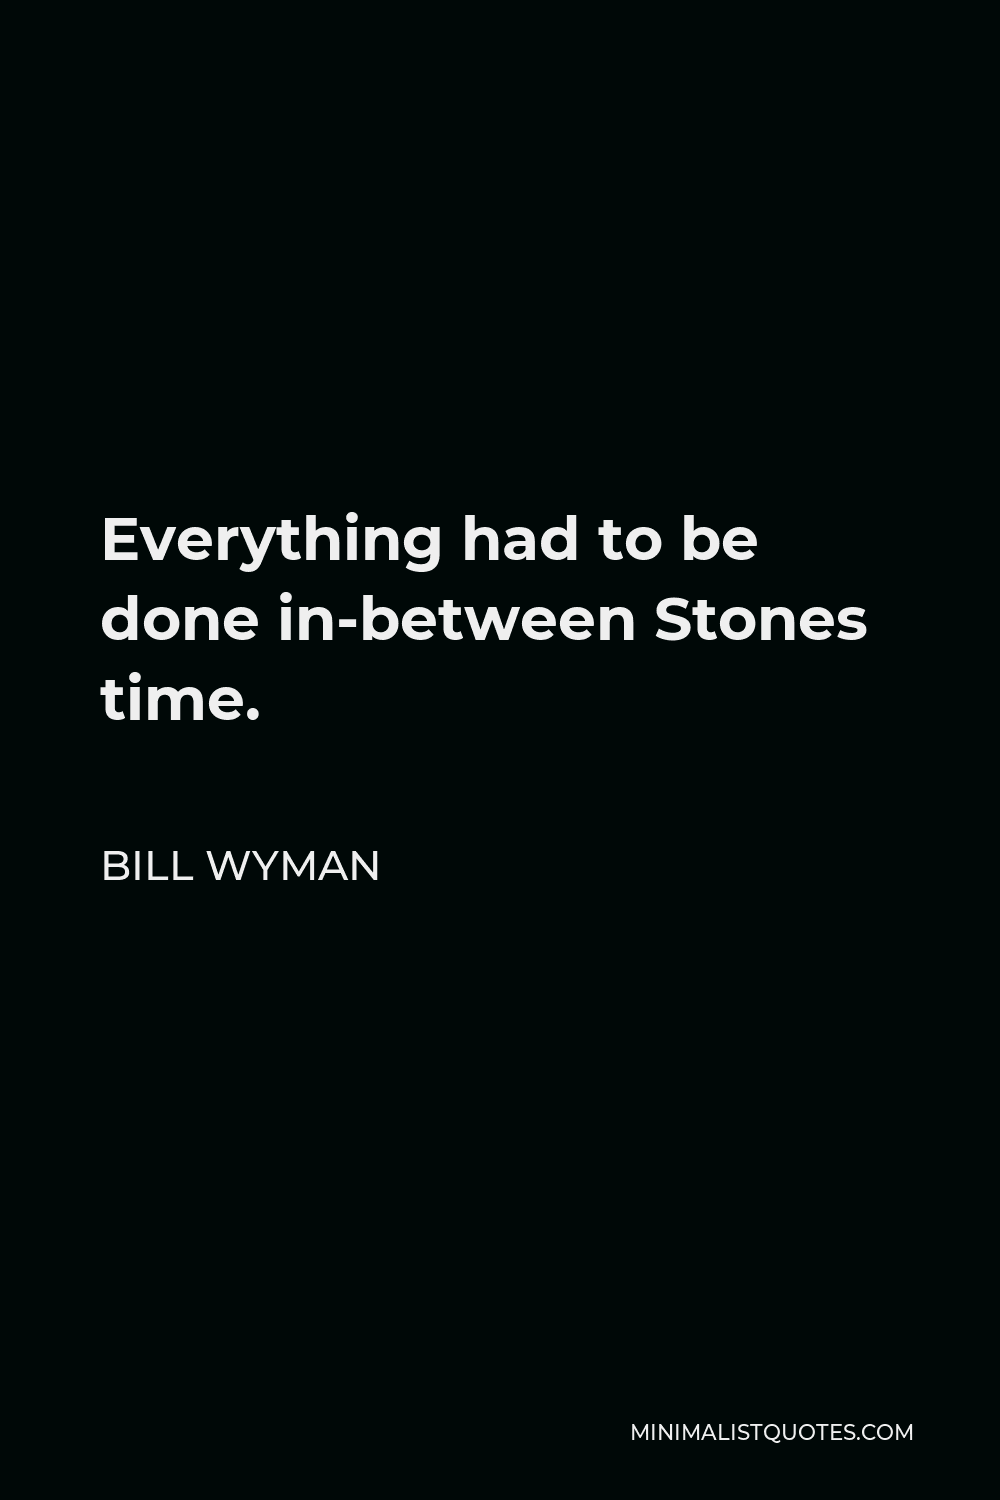 Bill Wyman Quote - Everything had to be done in-between Stones time.